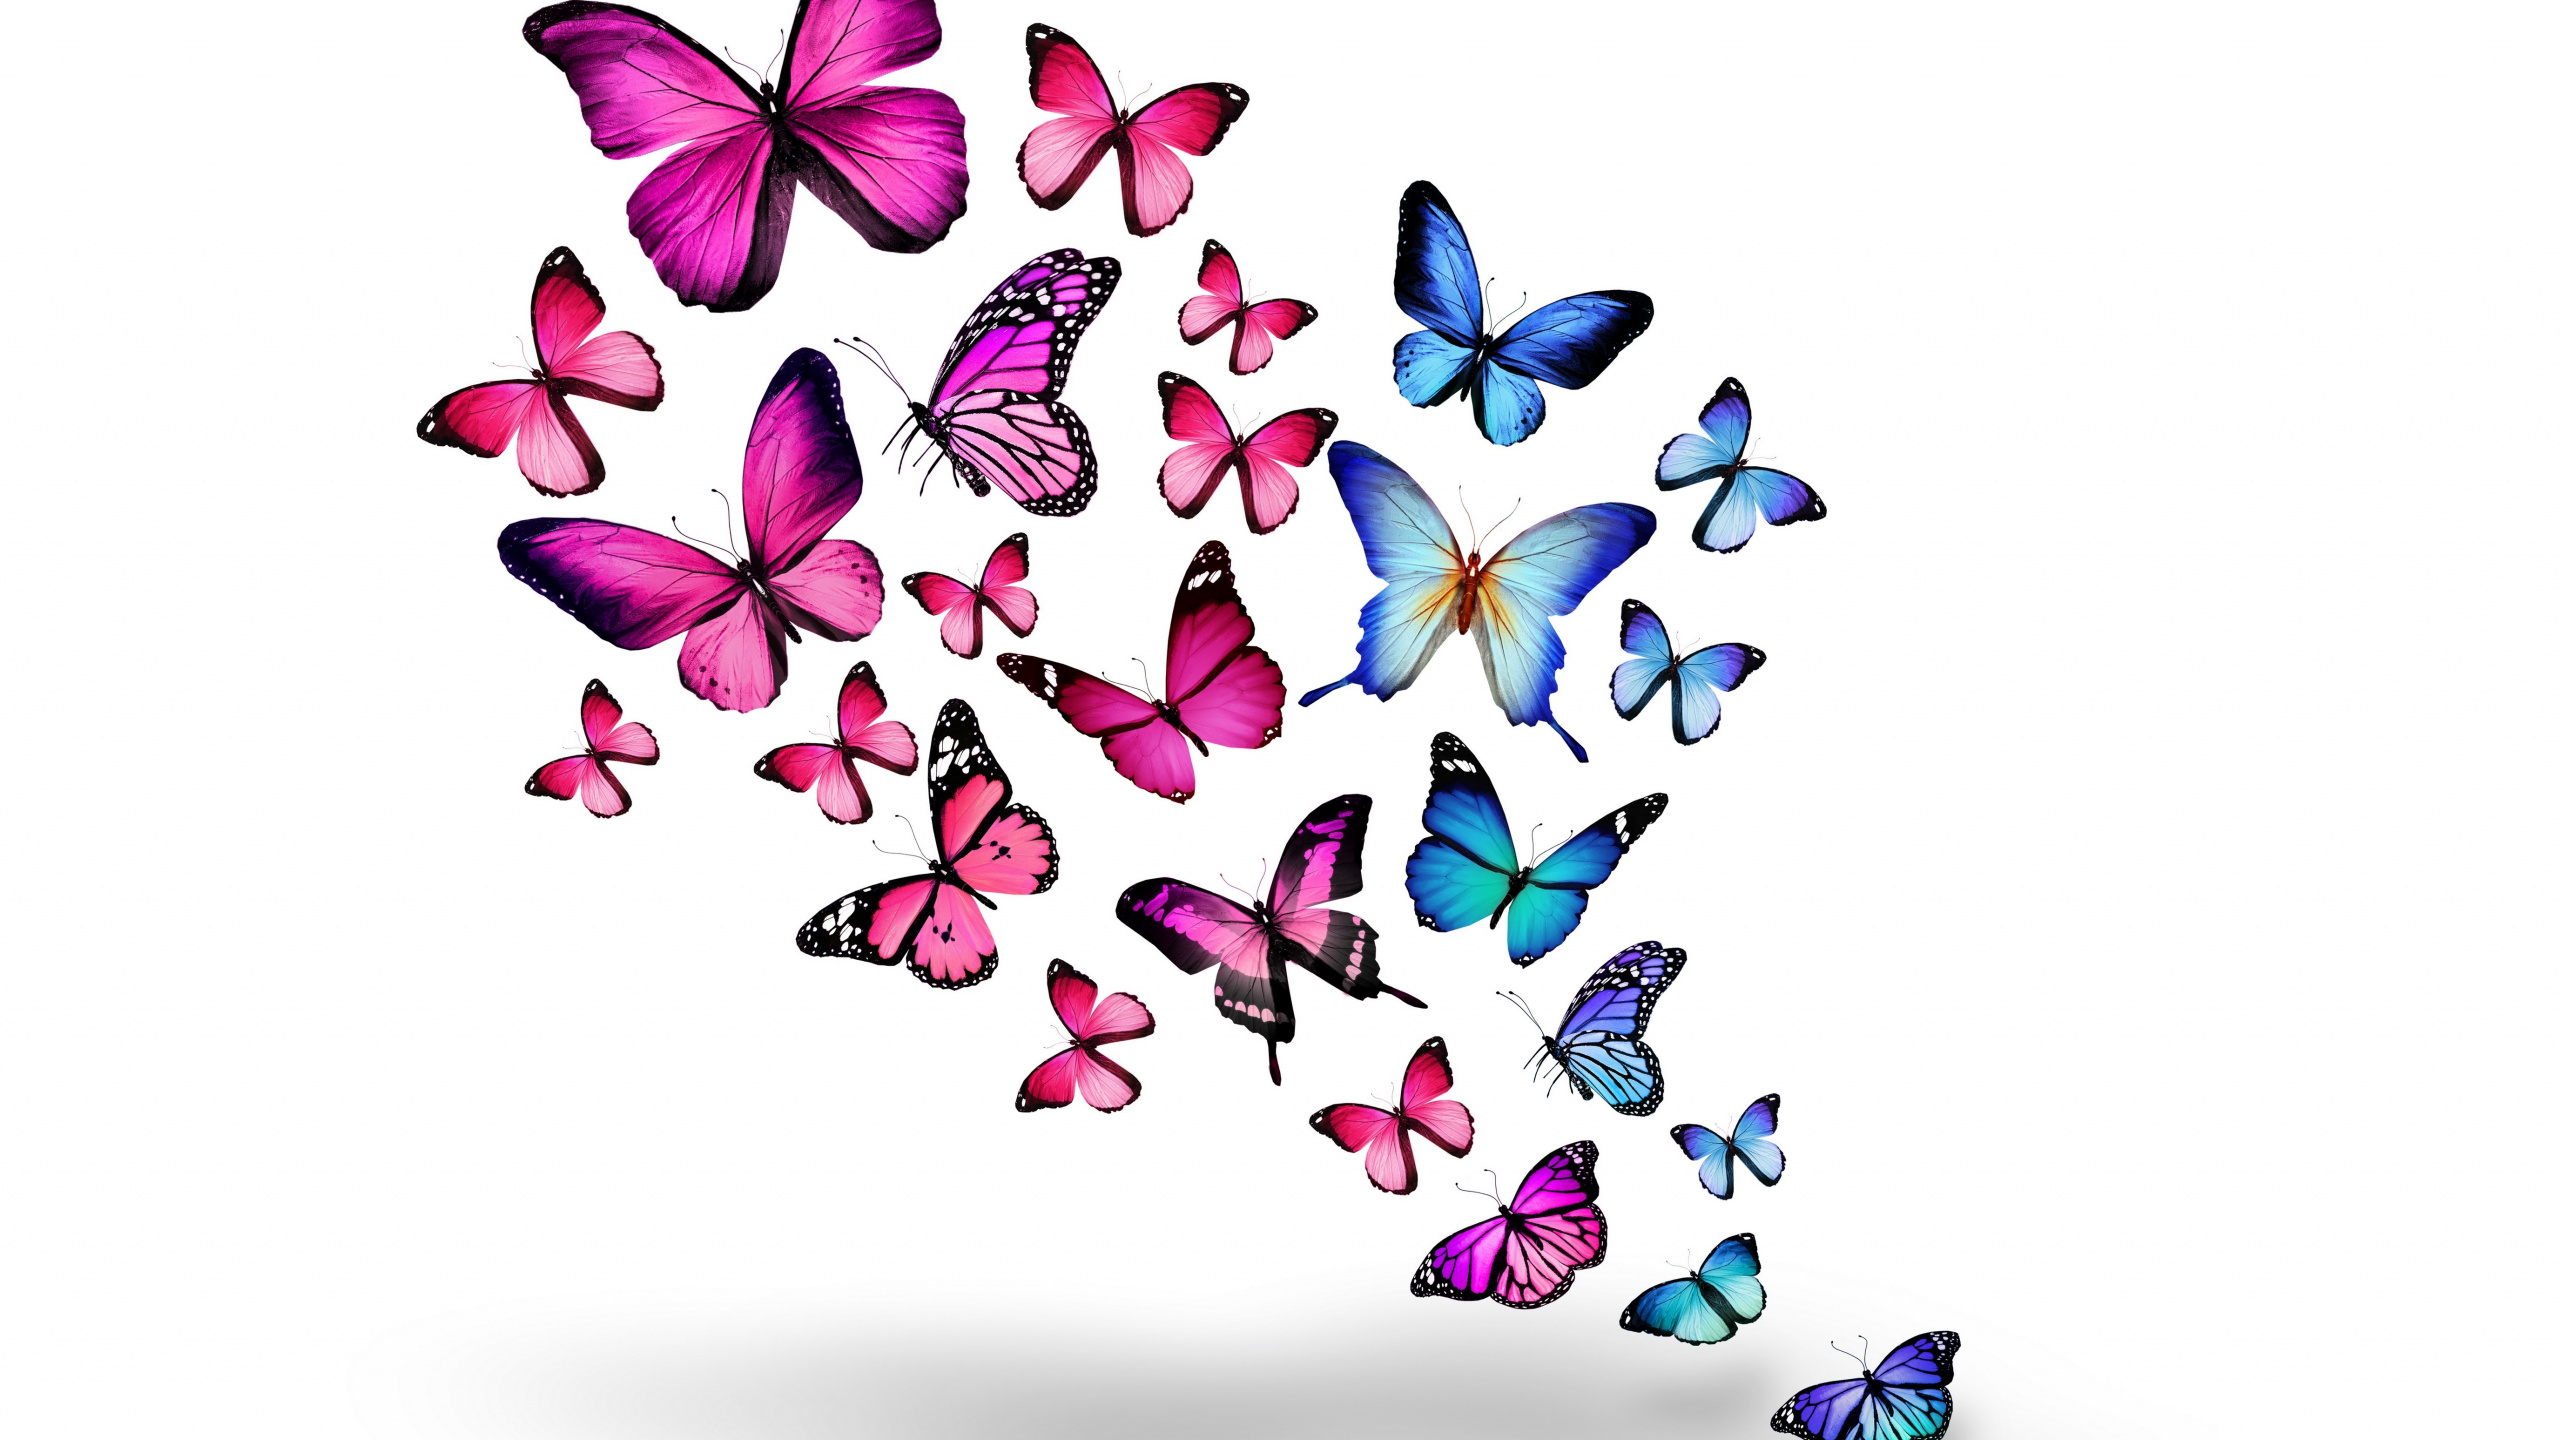 Blue and Purple Butterflies on White Background. Wallpaper in 2560x1440 Resolution